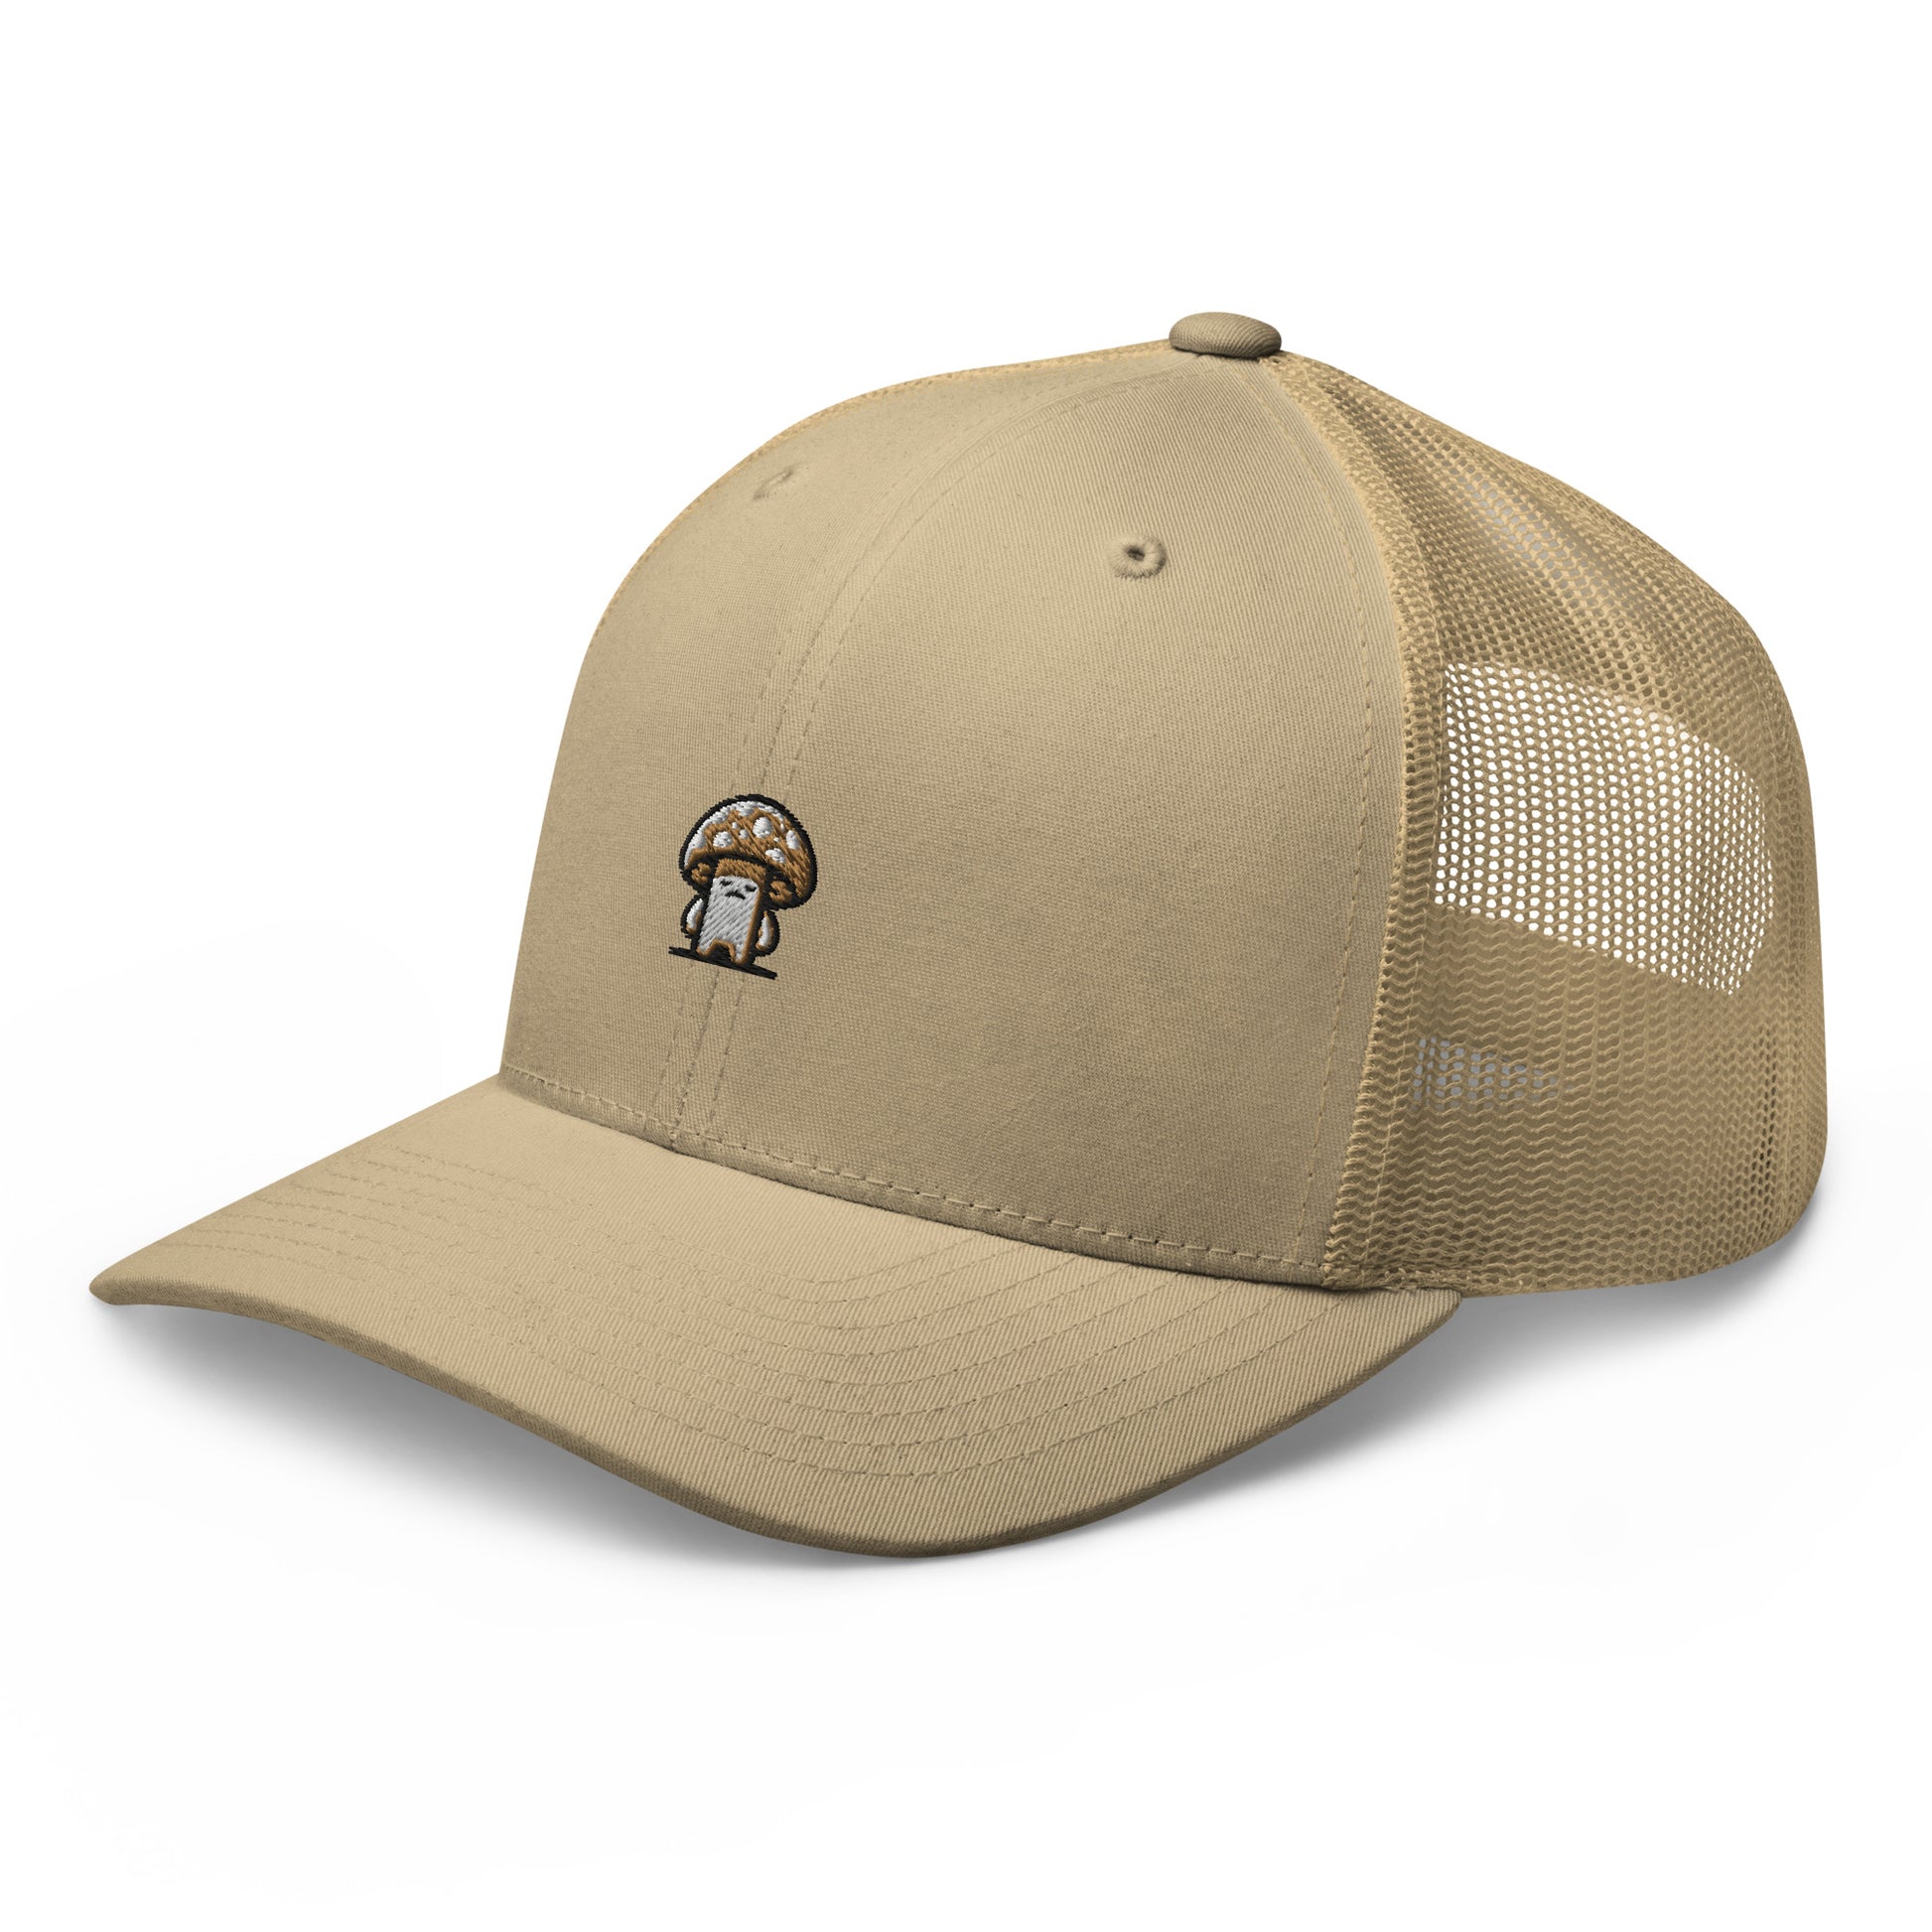 cap-from-the-front-with-mushroom-symbol